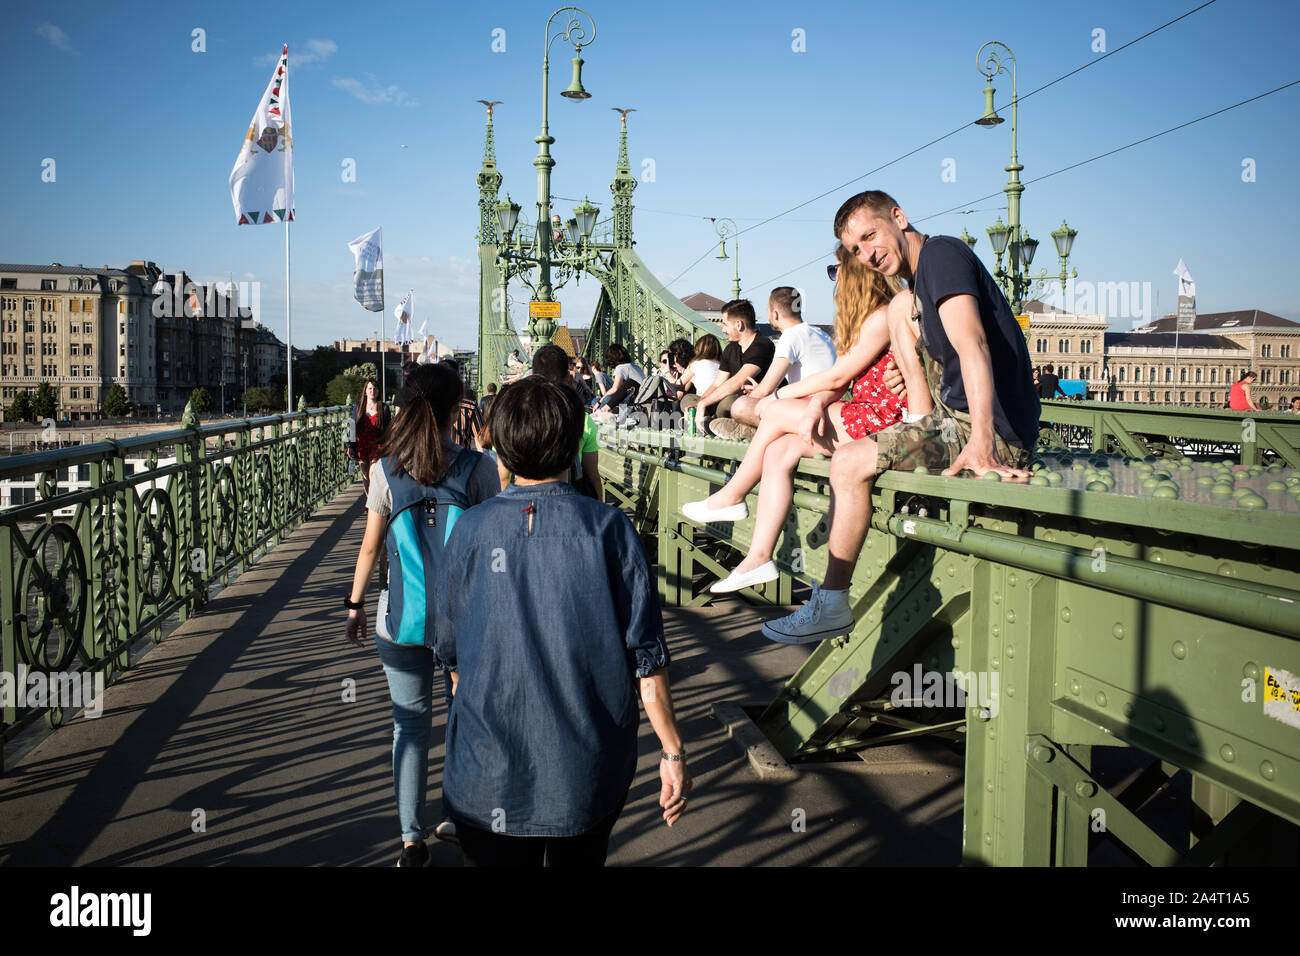 SZABADSAG HID BRIDGE BUDAPEST - 1894-1896 DESIGNED BY ARCHITECT JANOS FEKETEHAZY - LOVERS SEATING ON THE IRON BRIDGE STRUCTURE DURING A SUNNY DAY - BUDAPEST CITY - BUDAPEST BRIDGE - BUDAPEST STREET PHOTOGRAPHY - HUNGARY © Frédéric BEAUMONT Stock Photo